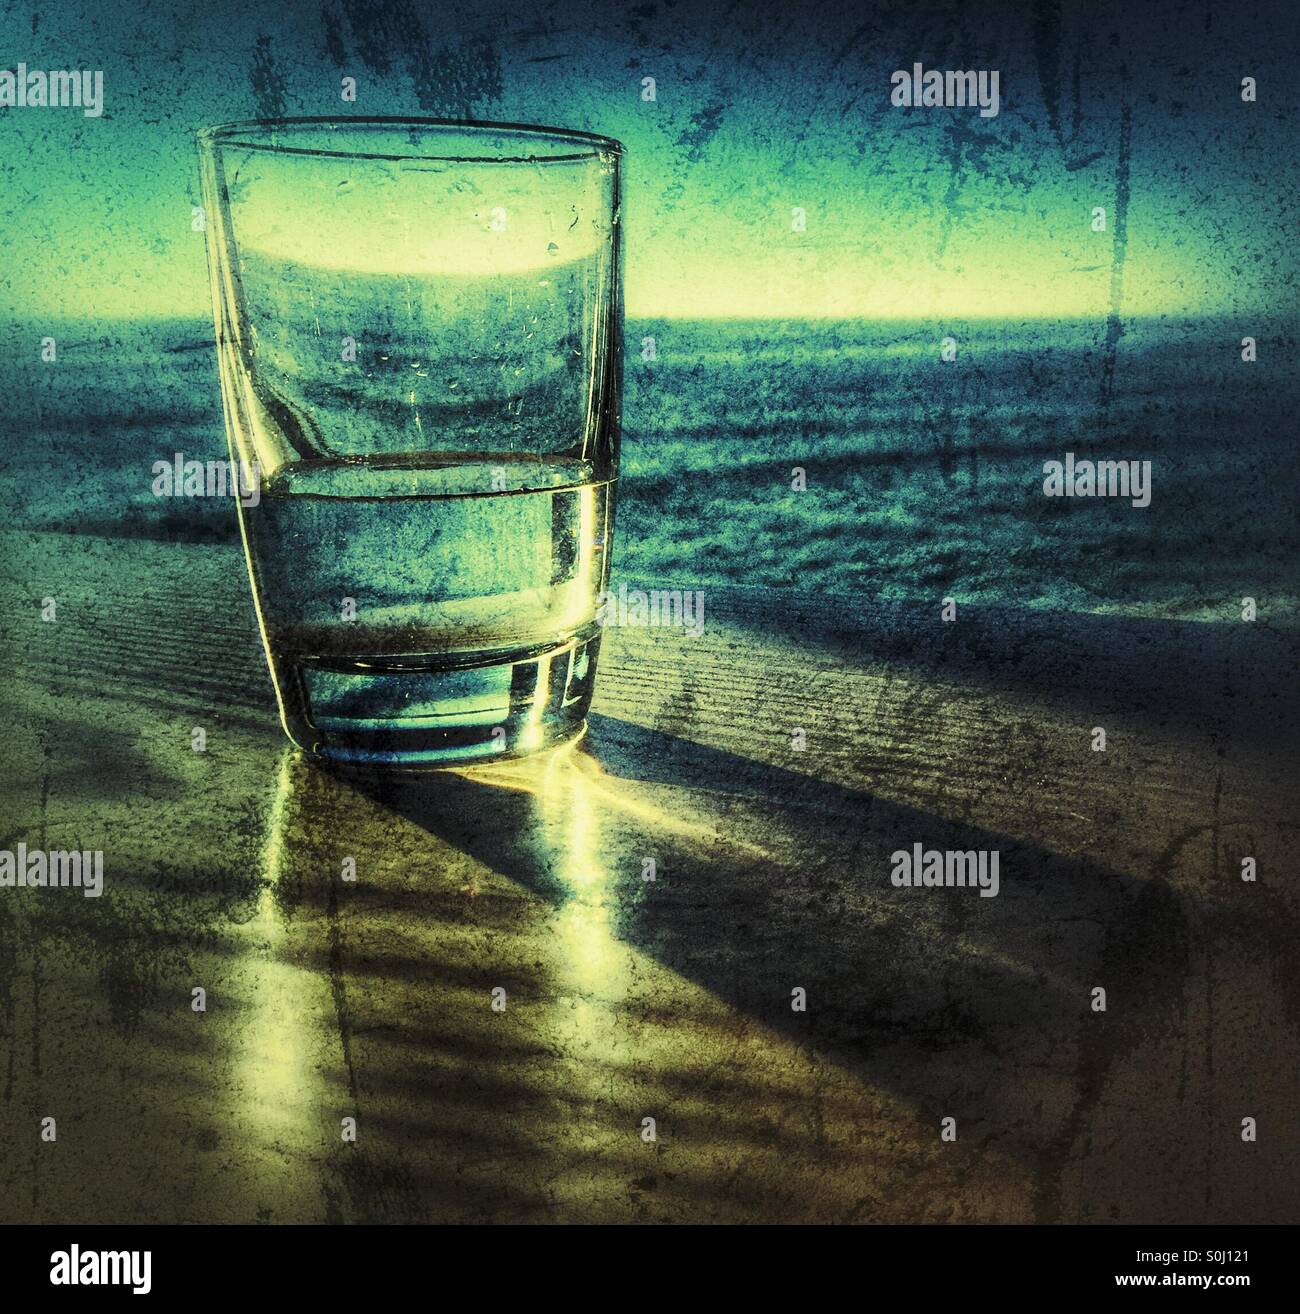 Pacific Ocean through a water glass Stock Photo